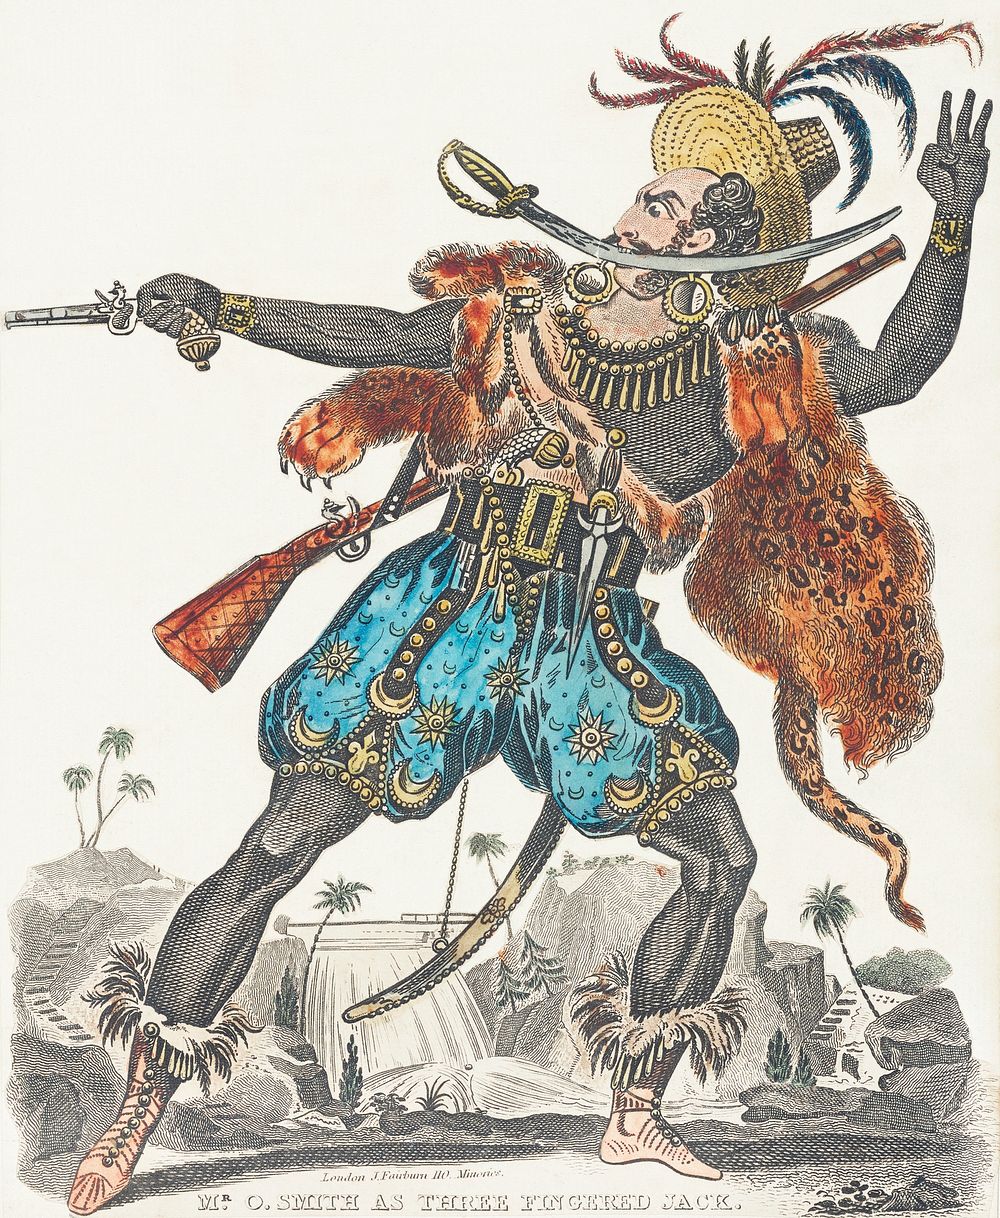 Vintage publicity illustration of Richard John Smith in the stage production "Obi", or Three-fingered Jack published in 1813…